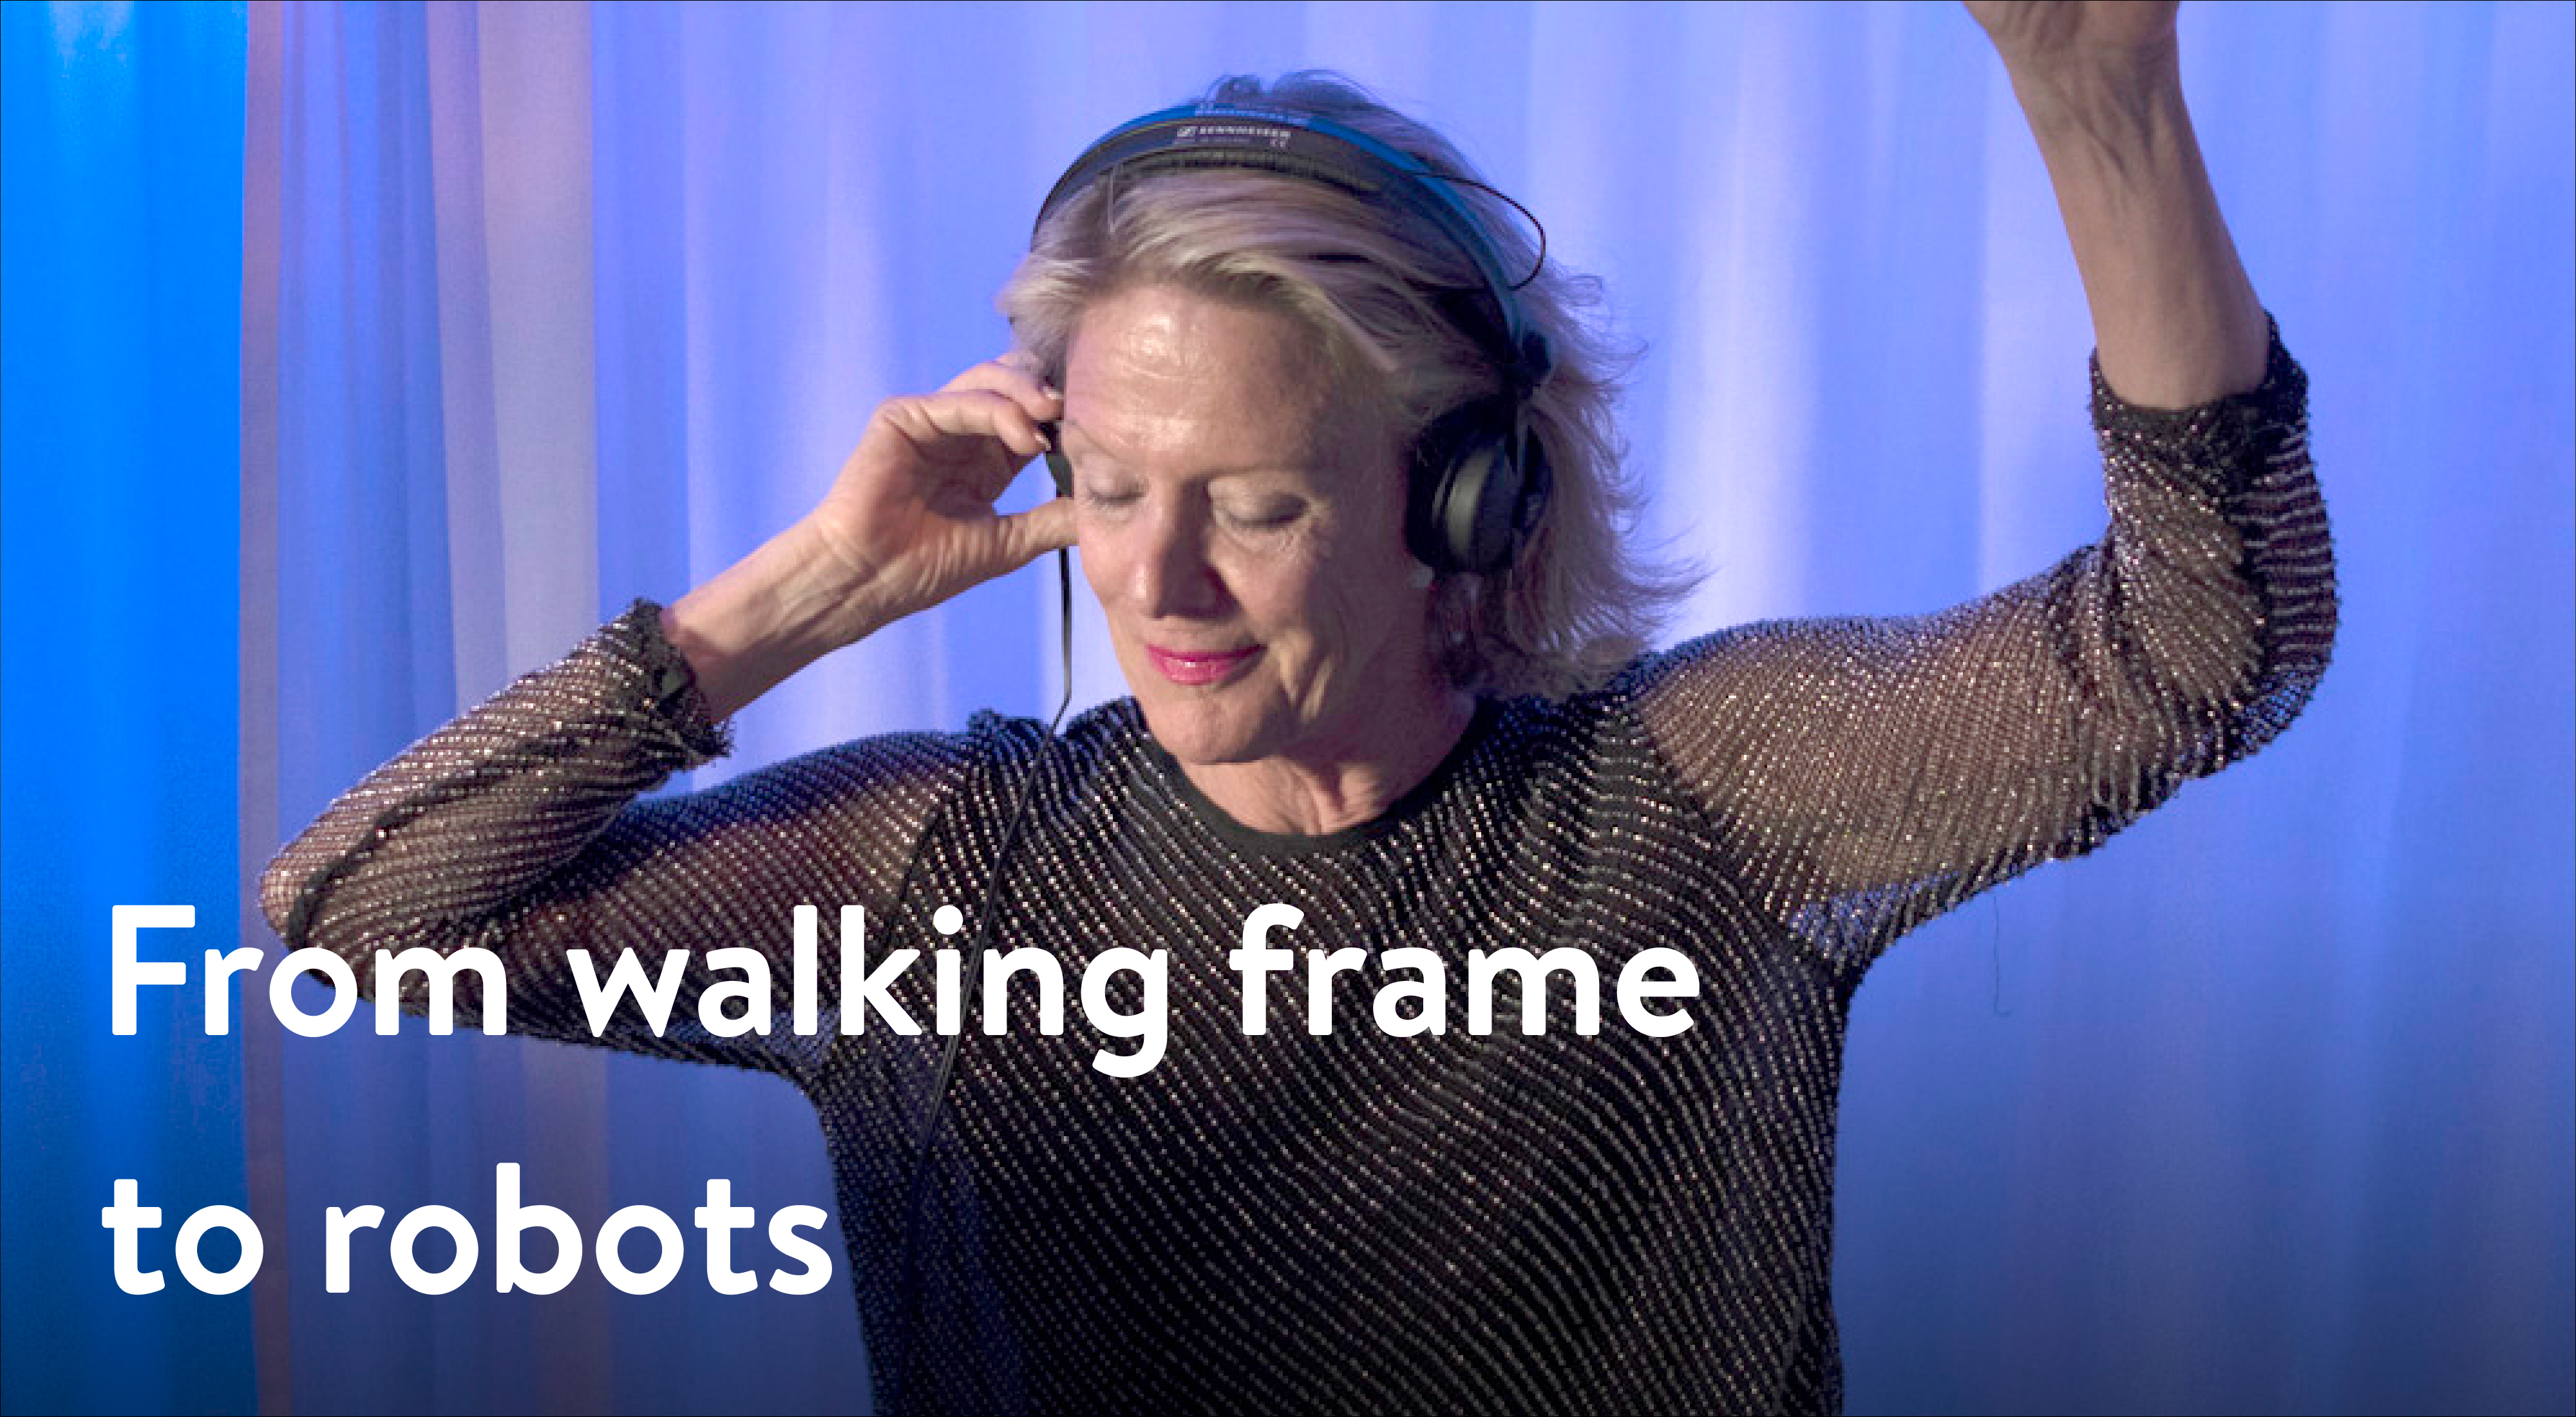 From walking frame to robots